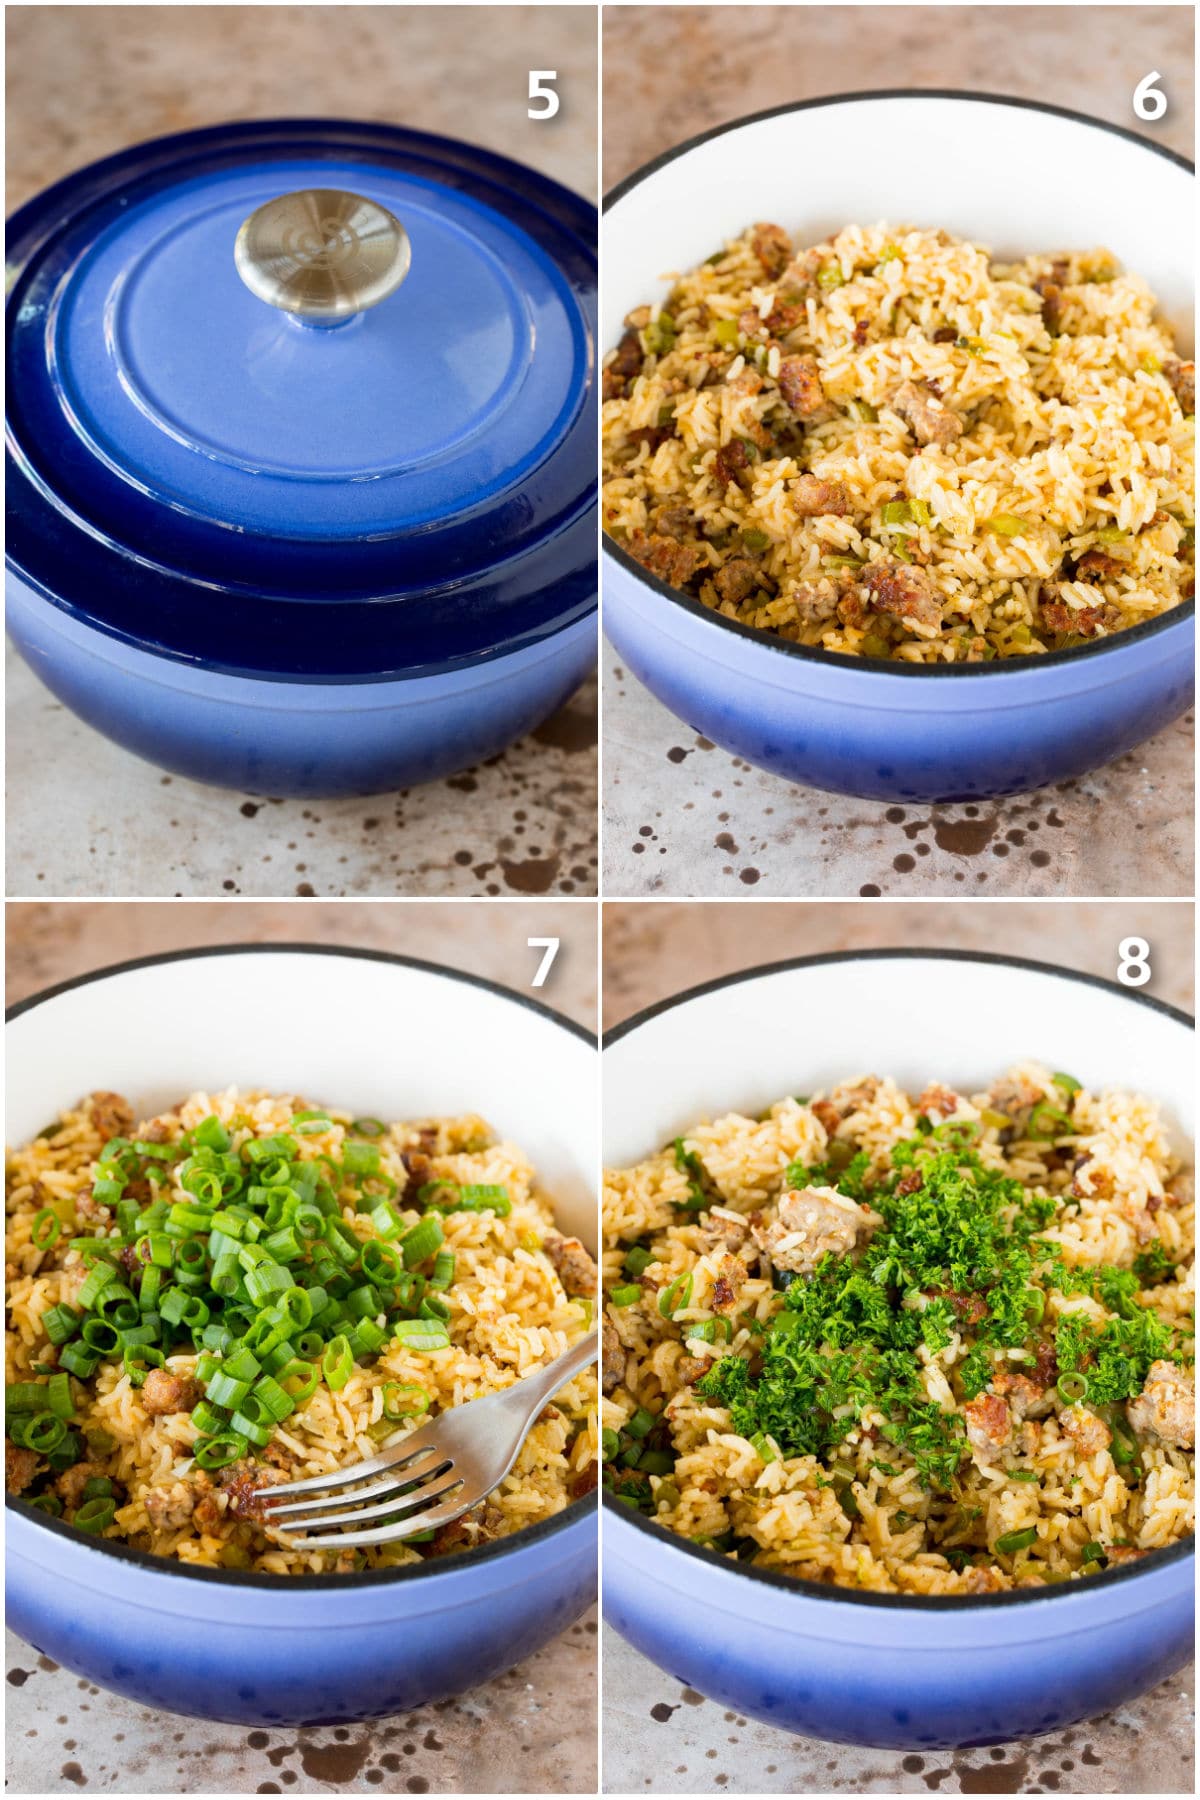 Process shots showing a pot of rice, uncovered, then fluffed with a fork and an herb garnish.